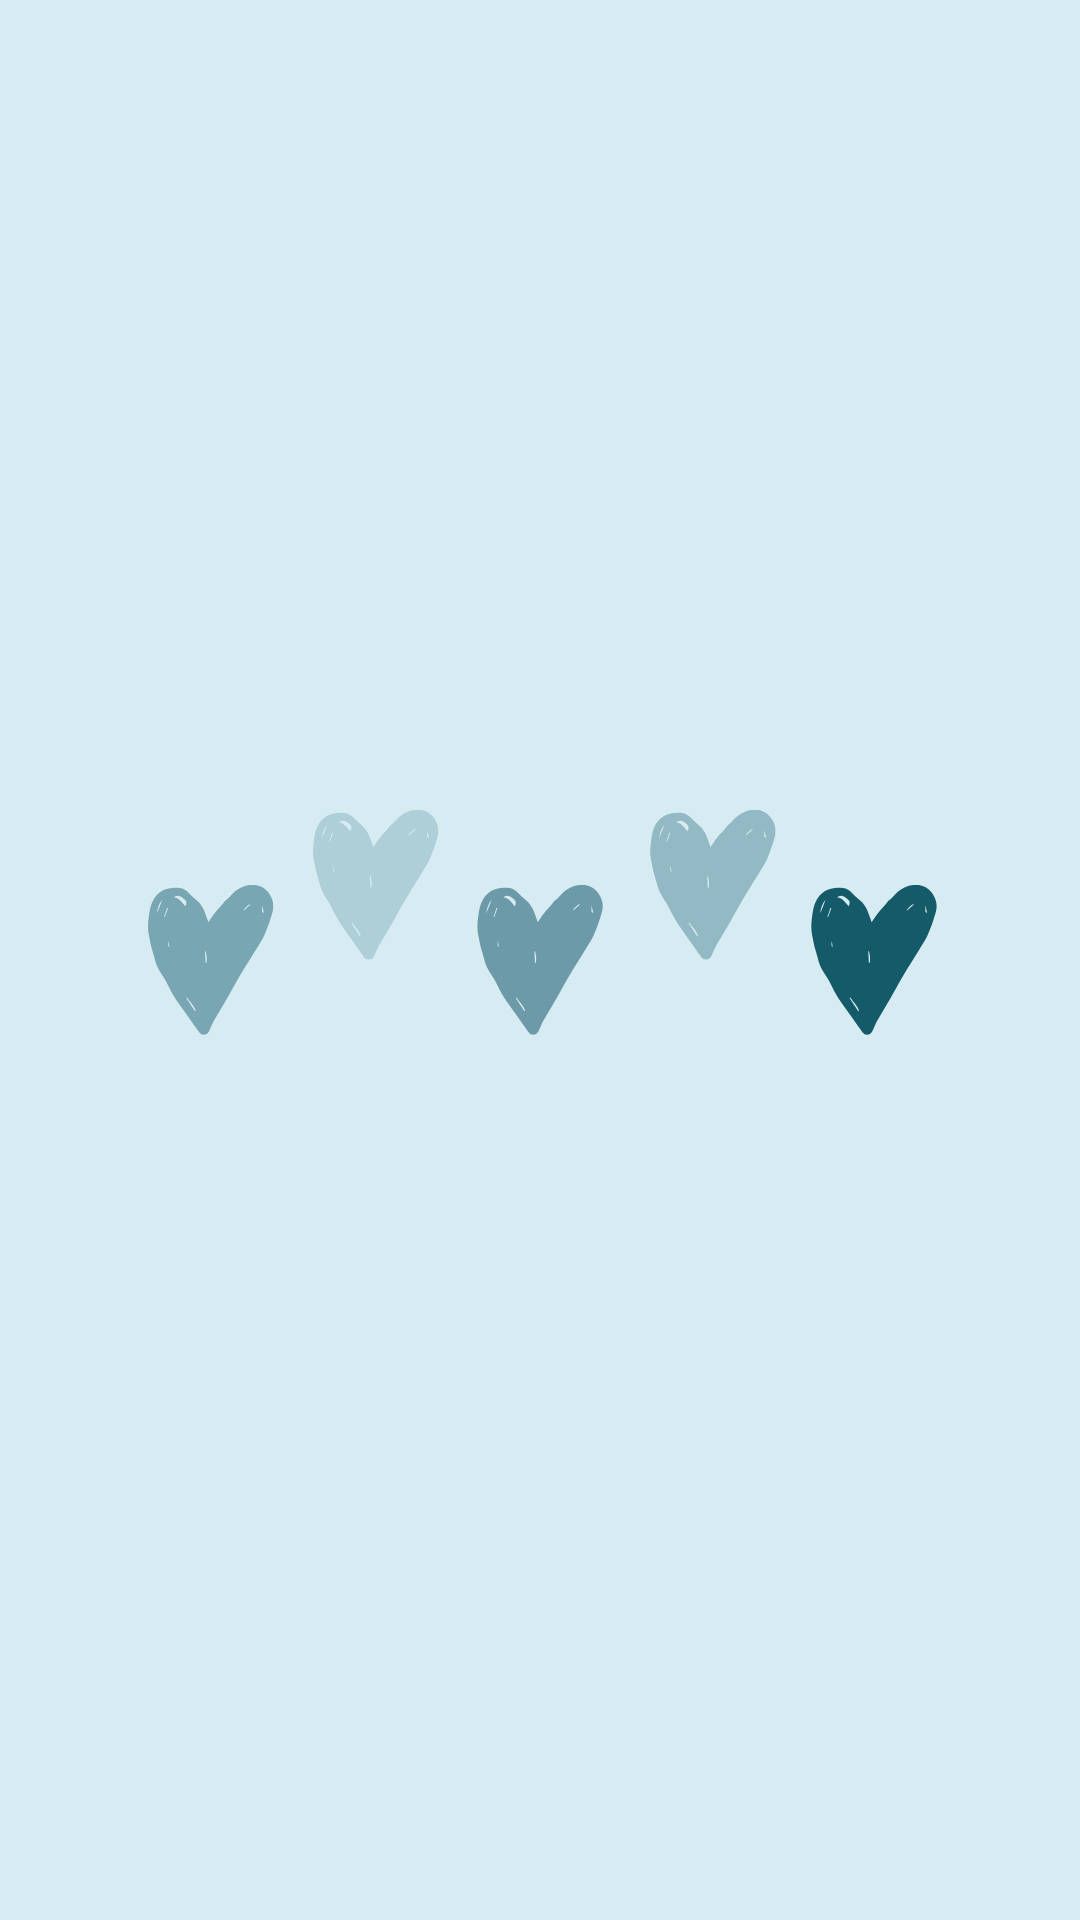 A row of five hearts, decreasing in size from left to right. The last heart is blue. - Blue, heart